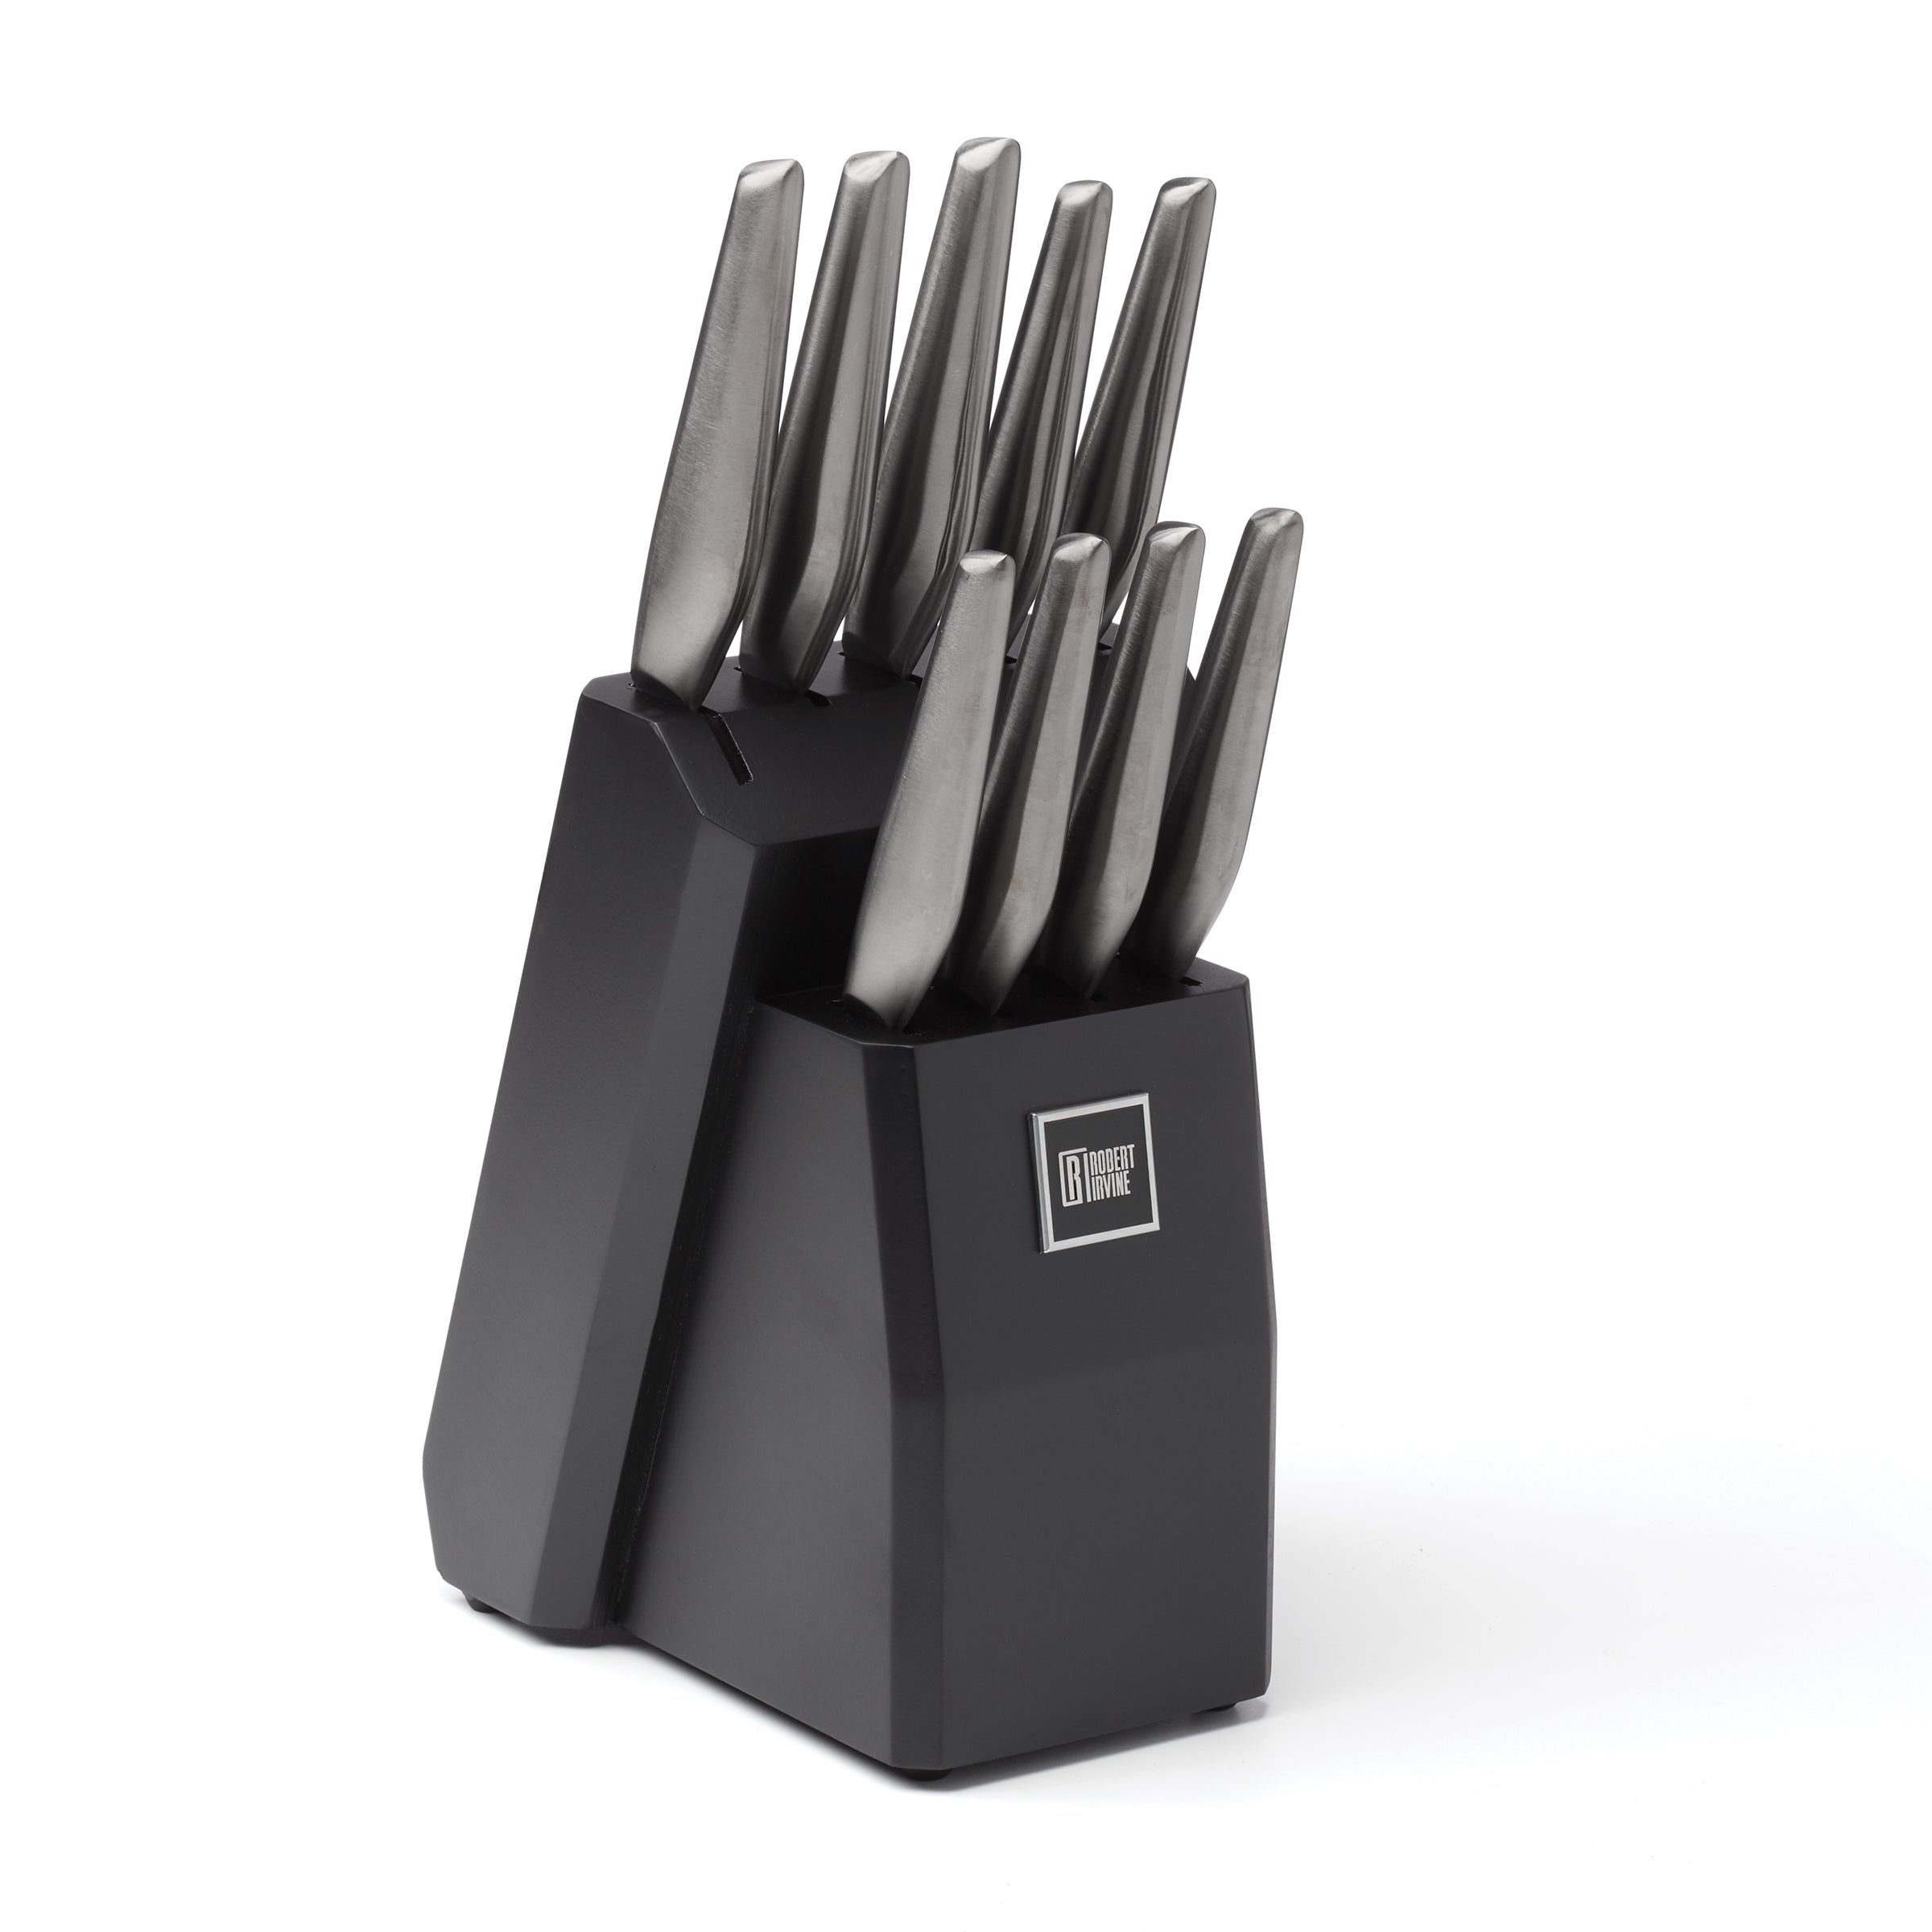 Malden Stainless Steel Knife Block Set - 16 Pc by Chicago Cutlery